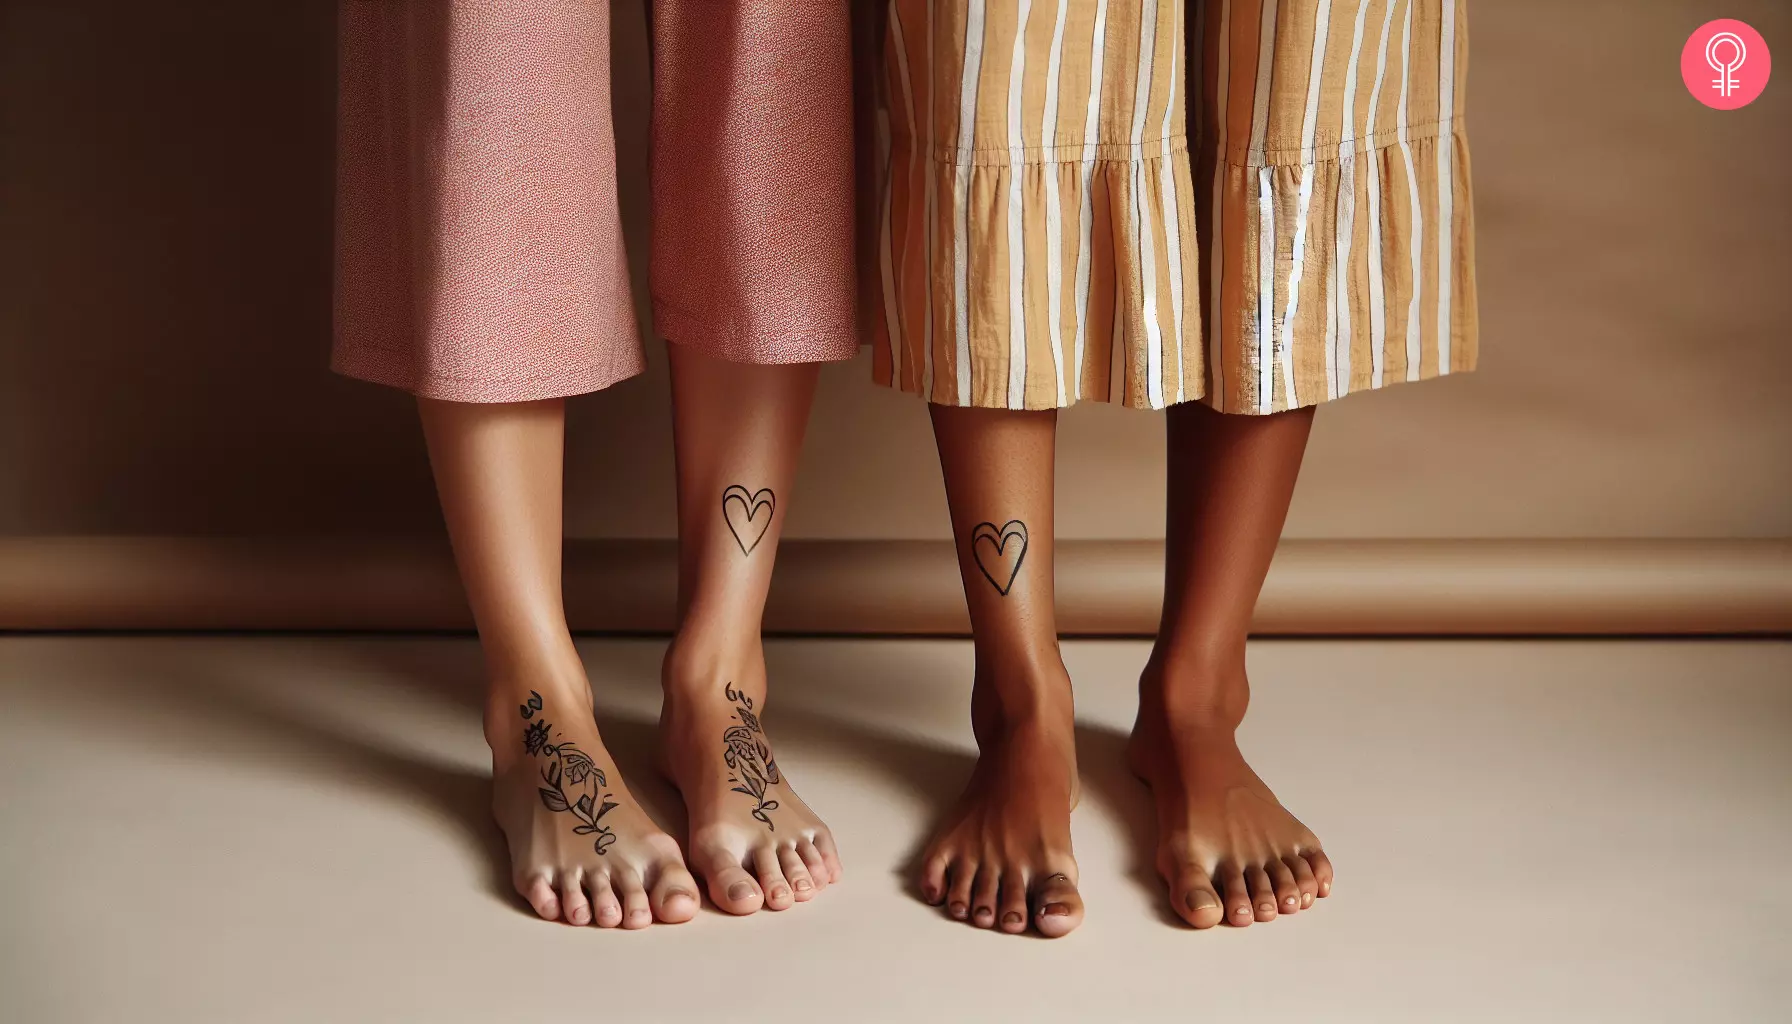 Matching heart tattoos near the ankle